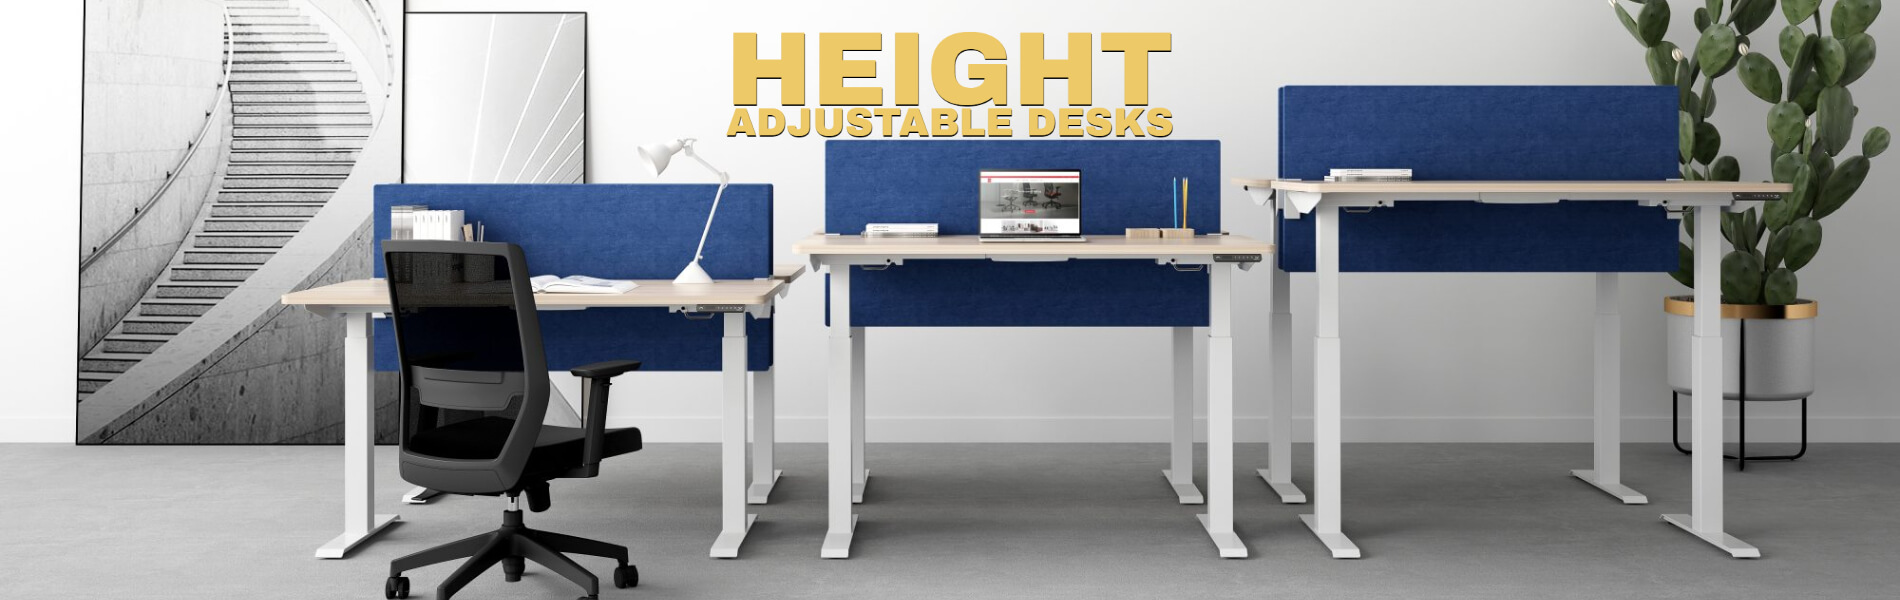 Check out height adjustable desks offered by Office Tech